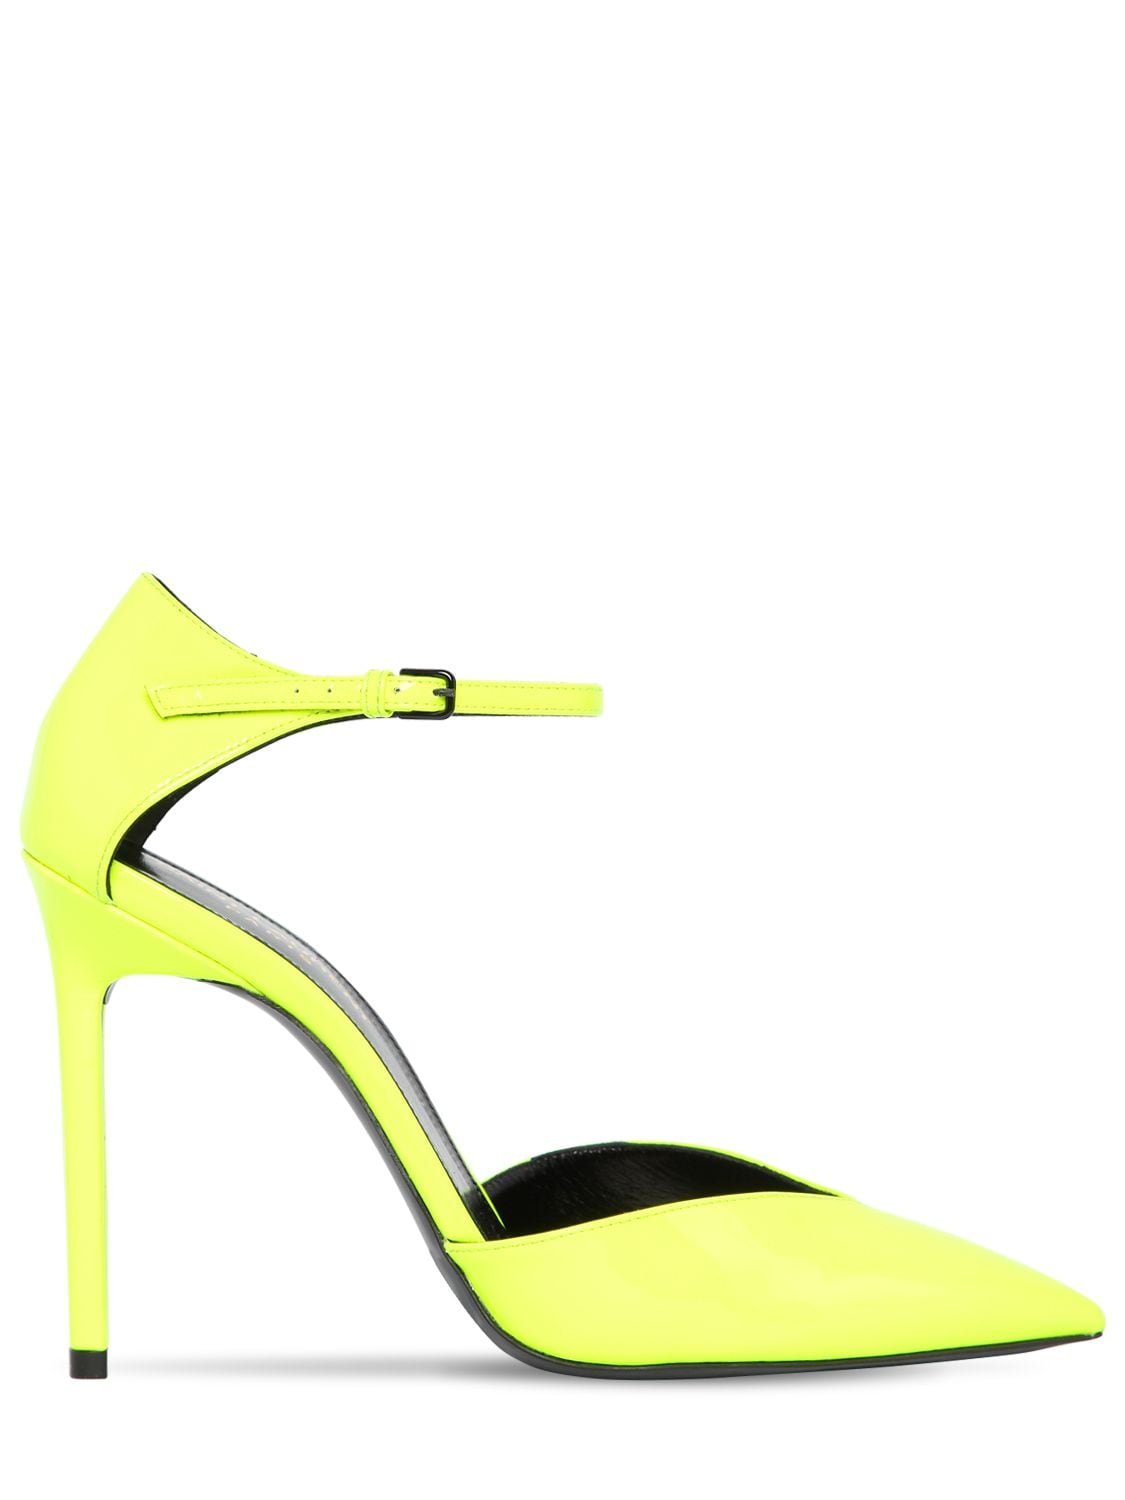 Saint Laurent 105mm Anja Patent Leather Pumps In Neon Yellow